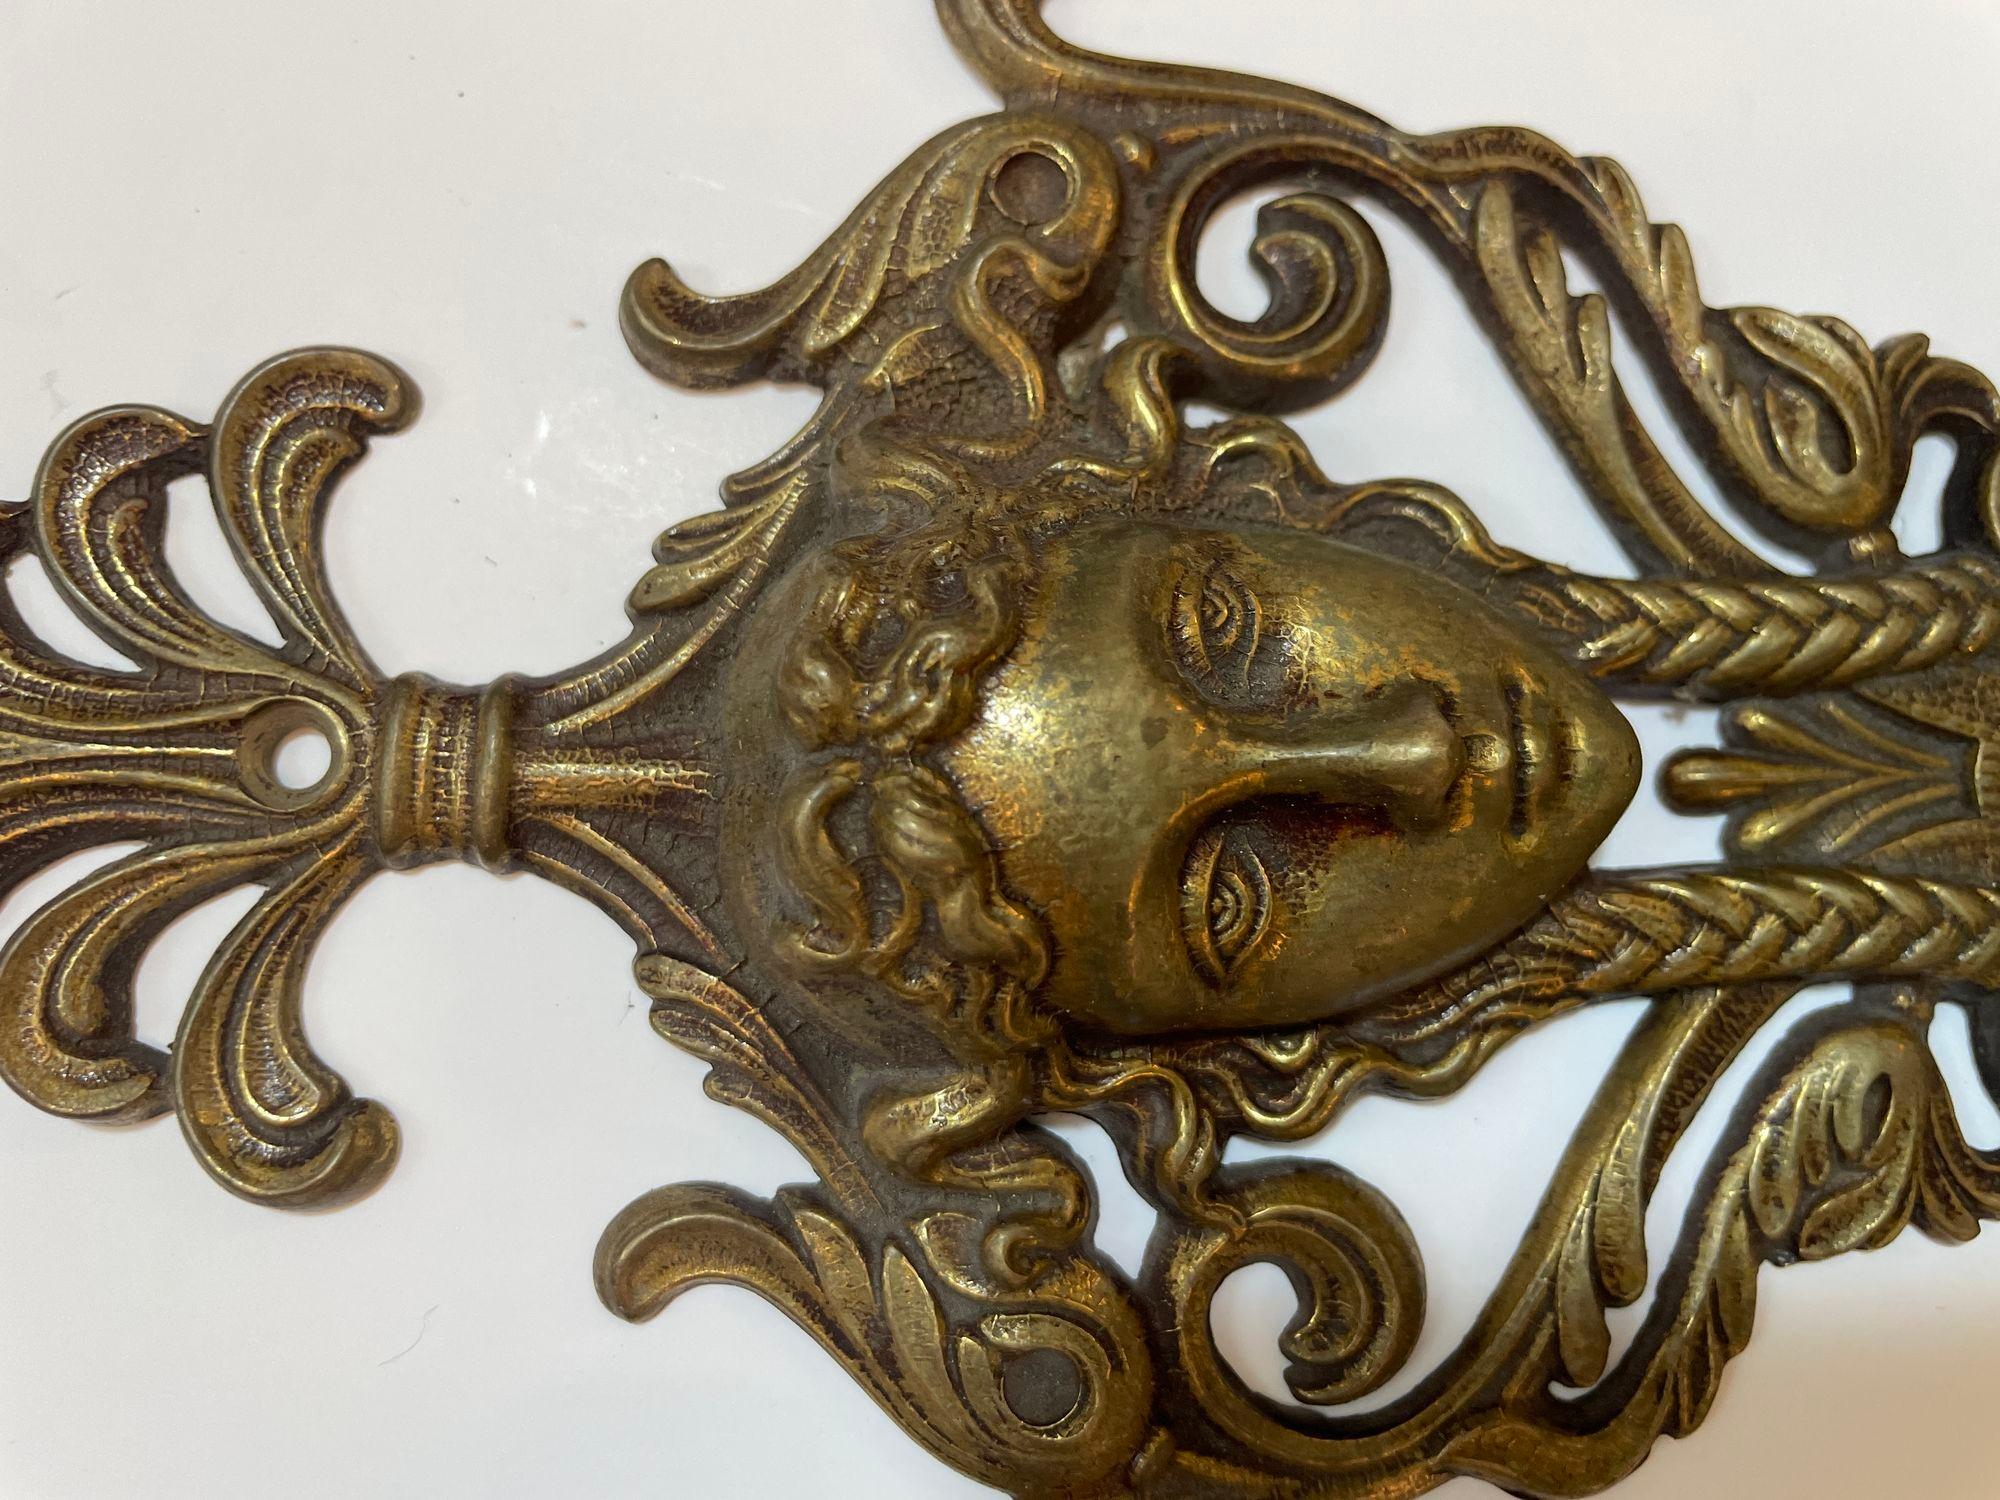 Antique Ornate Italian Figural Architectural Cast Brass Wall Hook Decor Set of 3 For Sale 9